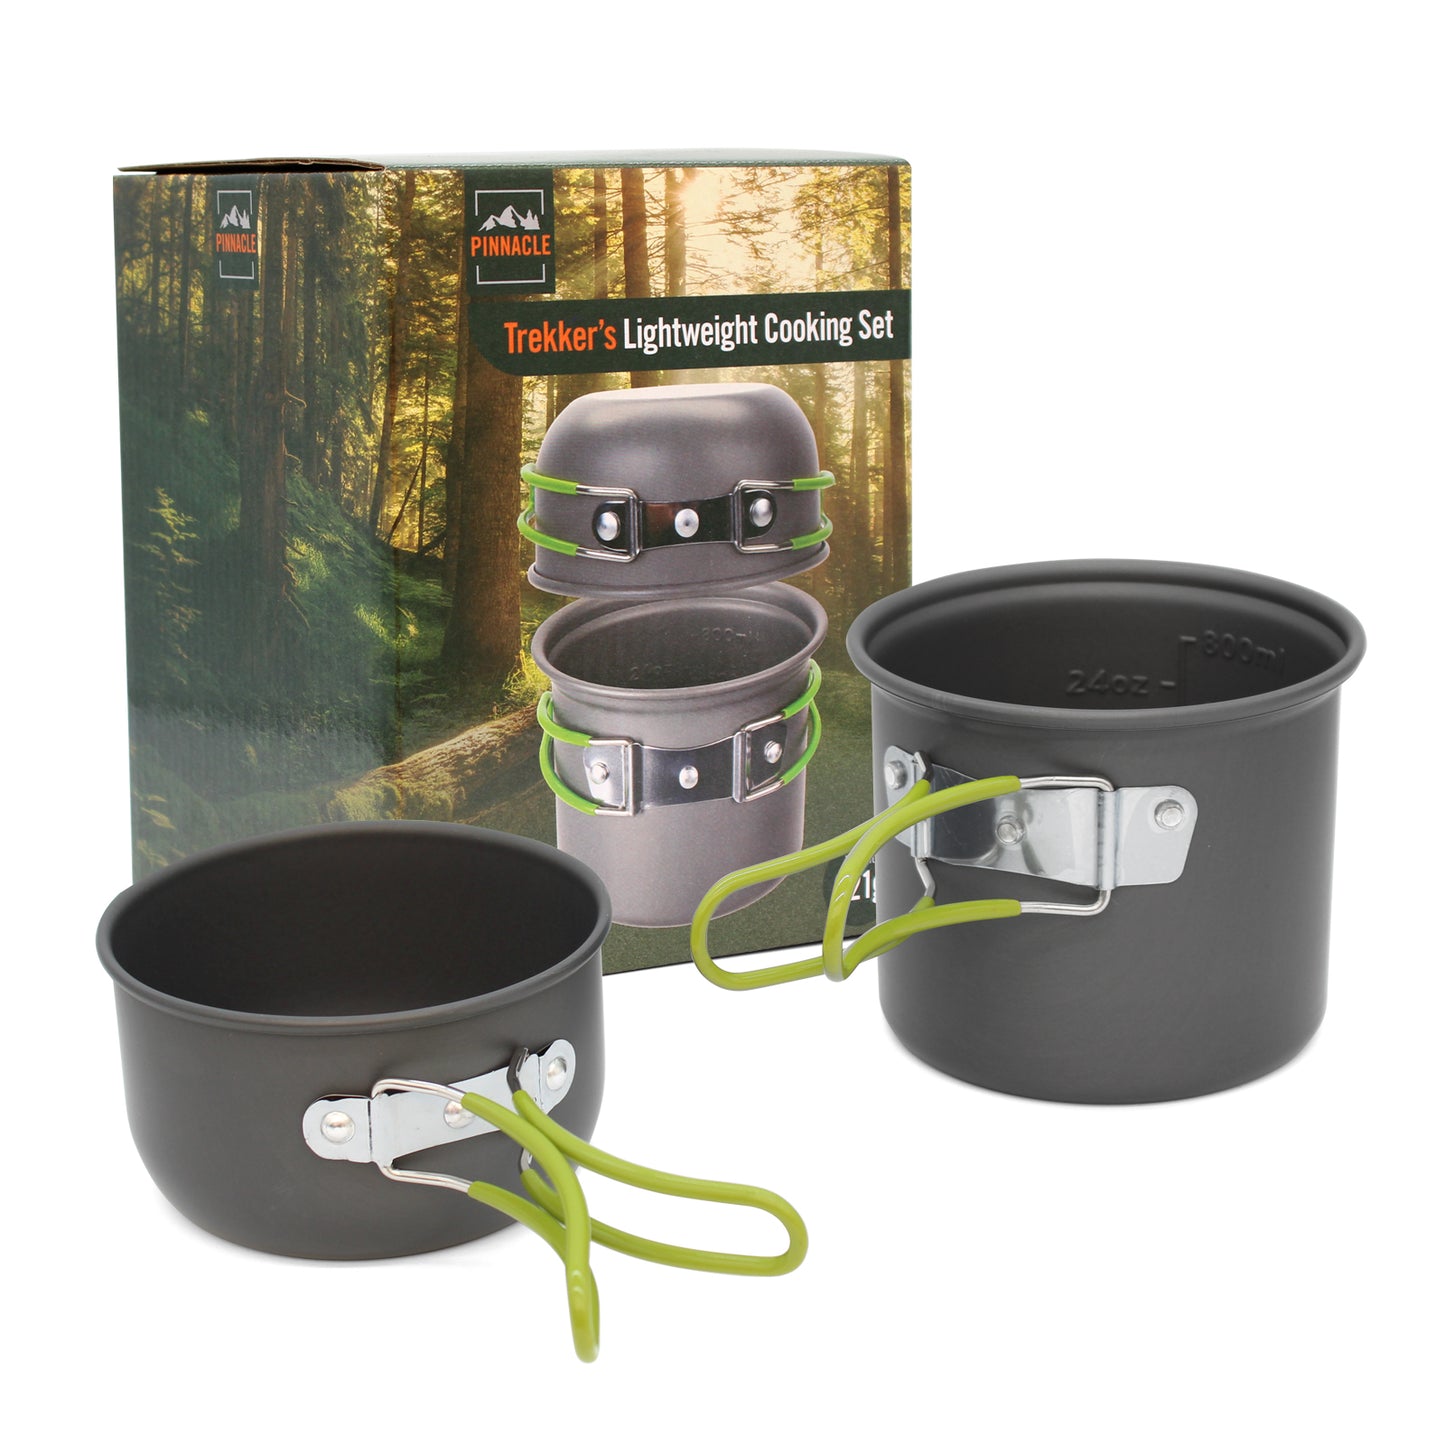 Trekkers Lightweight Cooking Set Box with Two Pots